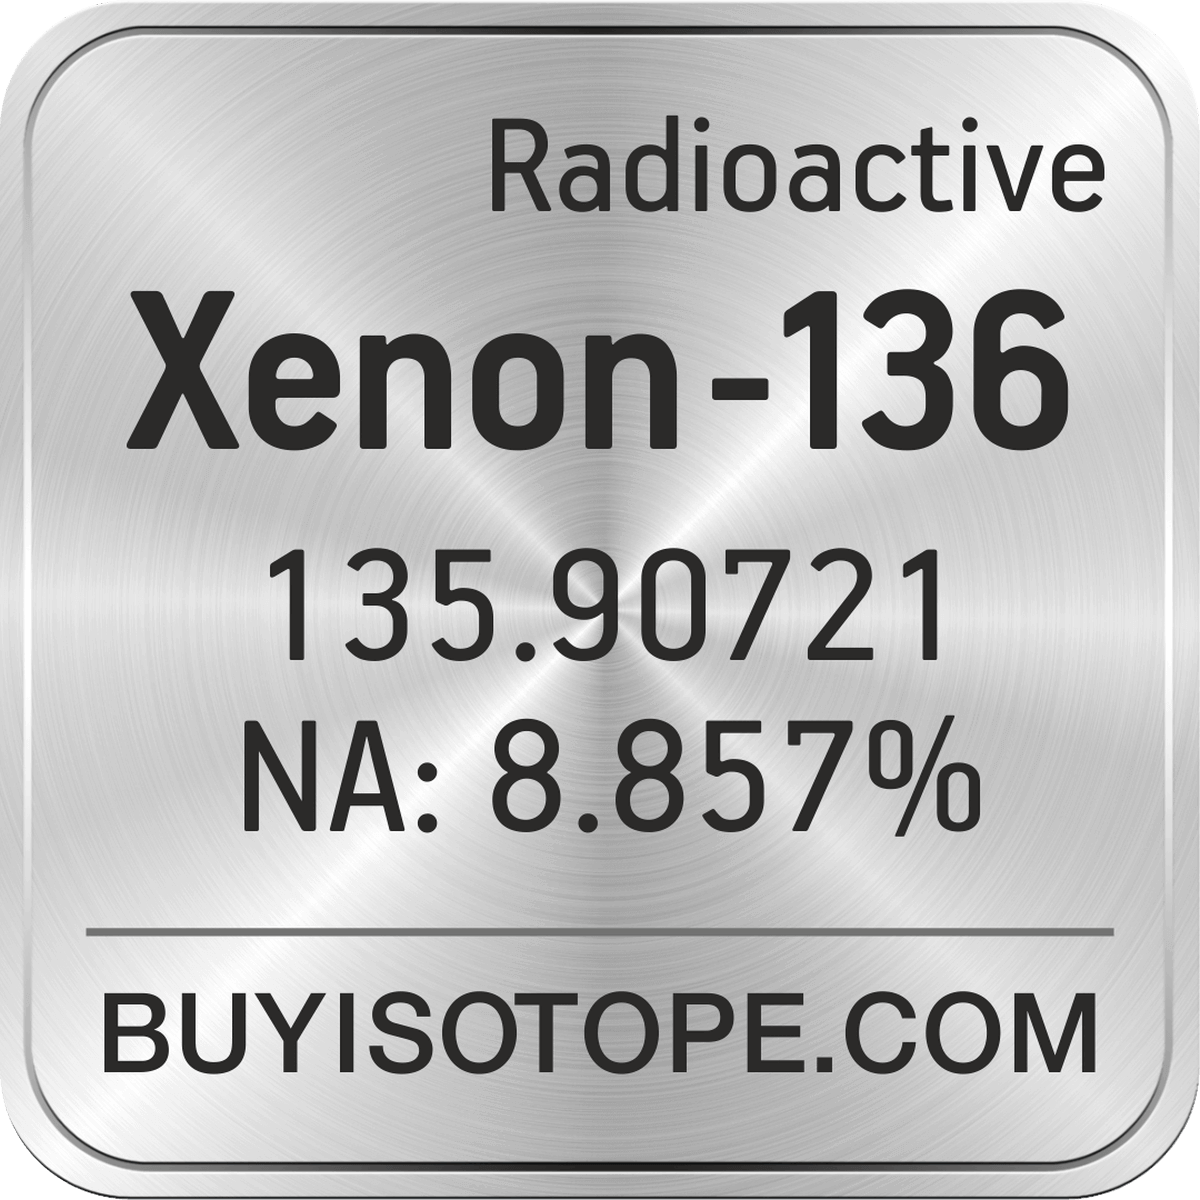 https://www.buyisotope.com/isotope-images/xenon-136-isotope-xenon-136-enriched-xenon-136-abundance-xenon-136-buy-xenon-136-supplier-xenon-136-atomic-mass-xenon-136-1200.png